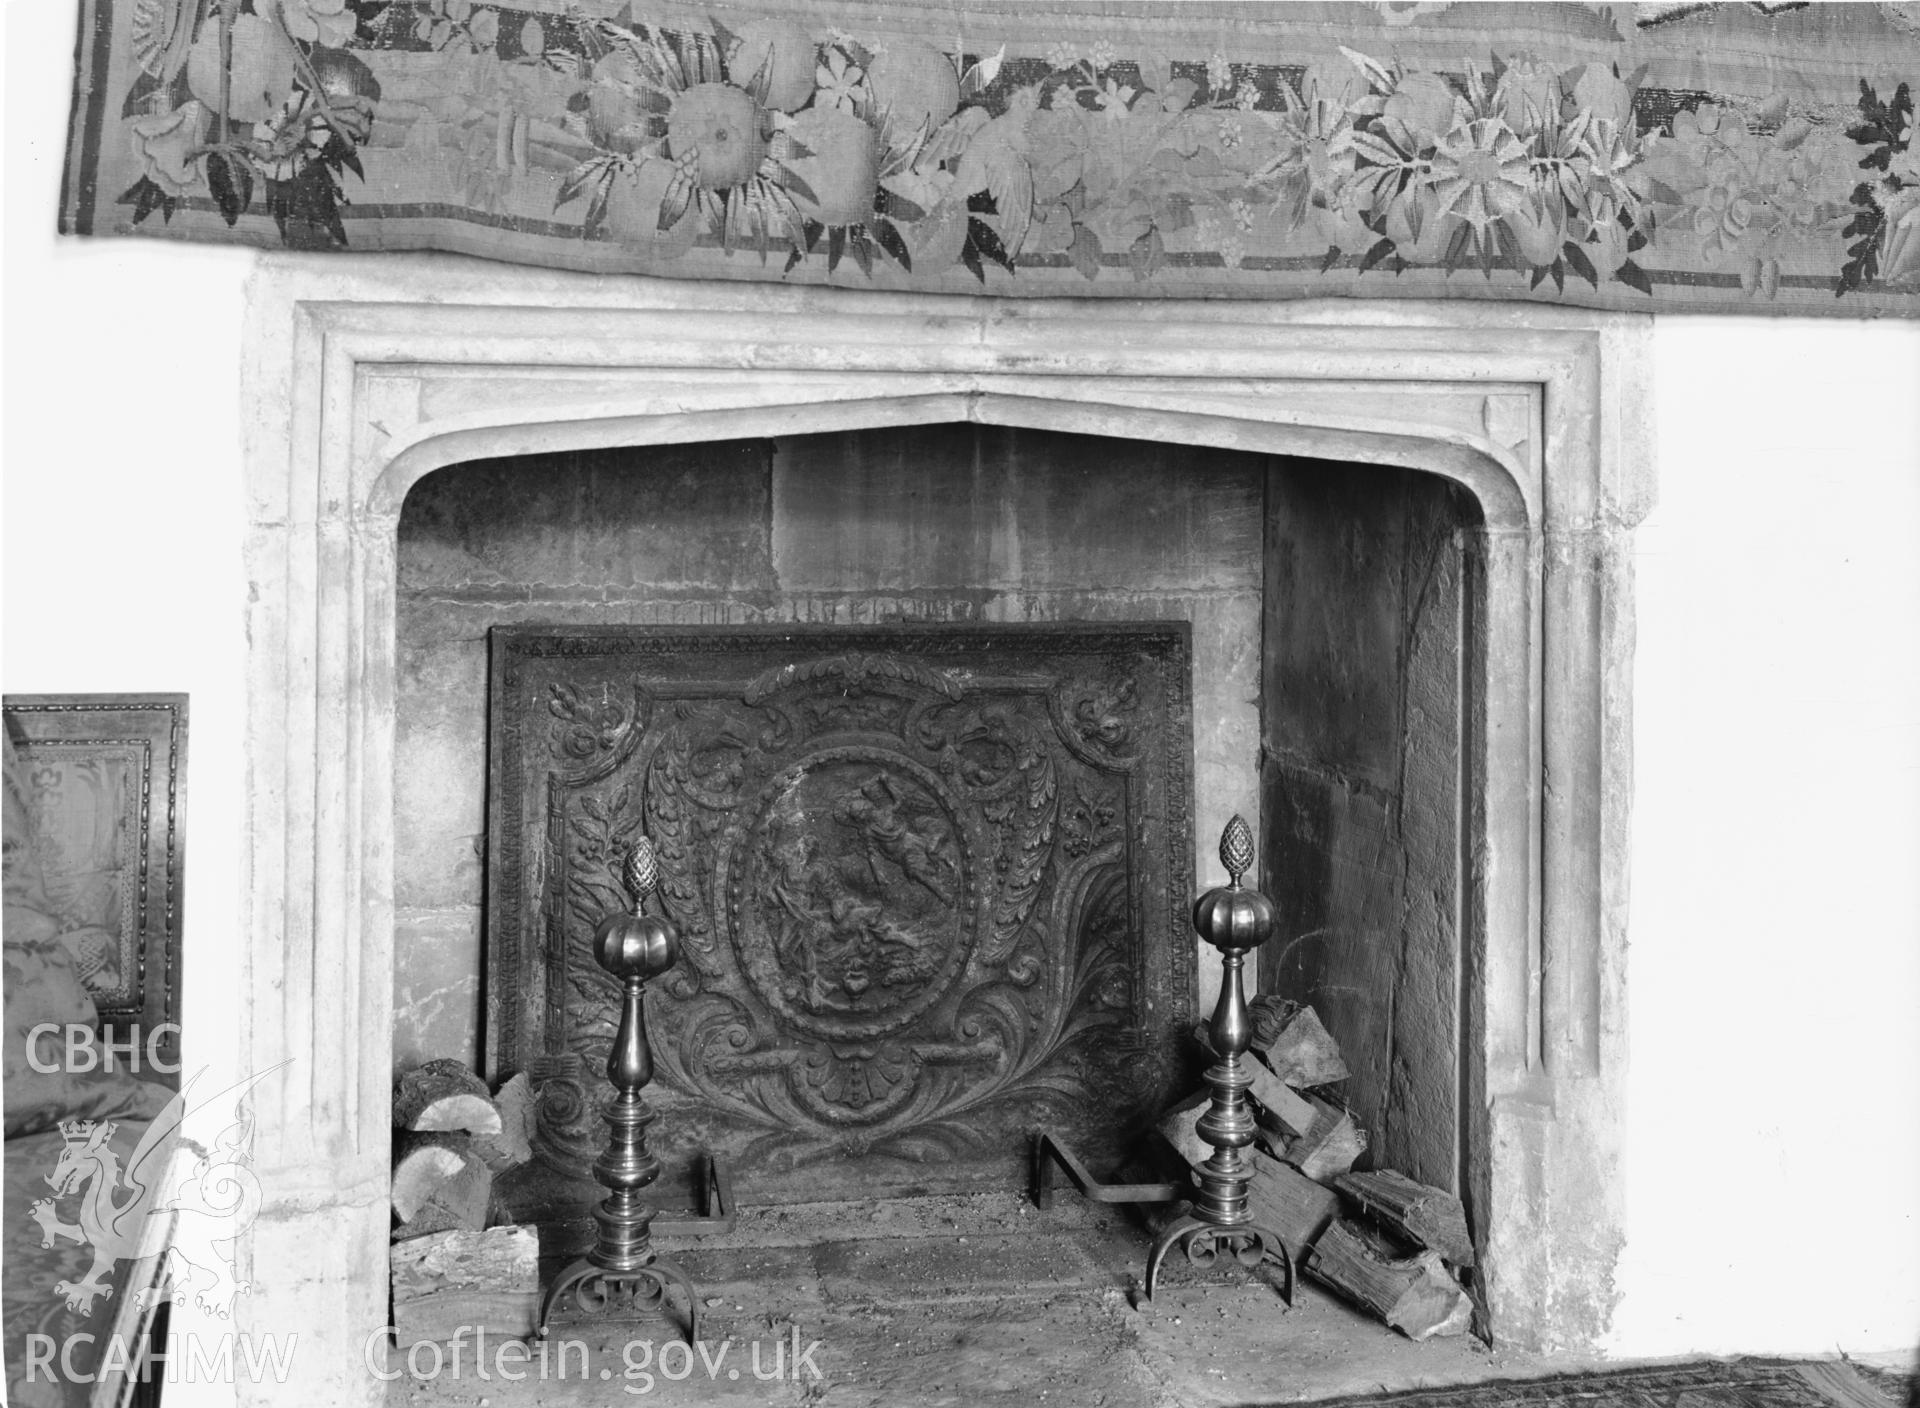 Interior view showing the fireplace in the Great Hall.